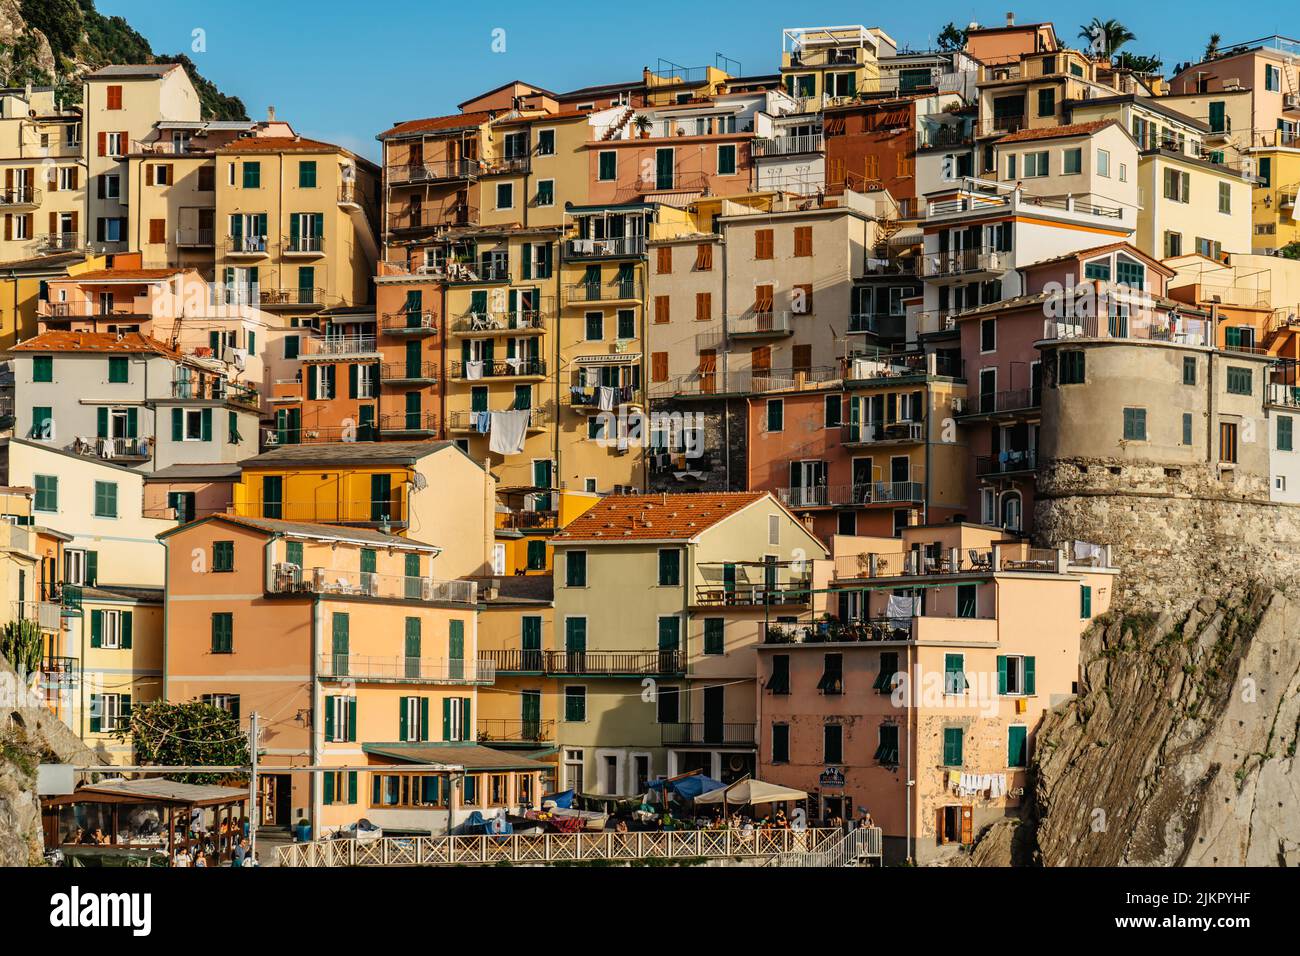 View of Manarola,Cinque Terre,Italy.UNESCO Heritage Site.Picturesque colorful village on rock above sea.Summer holiday,travel background.Italian Stock Photo